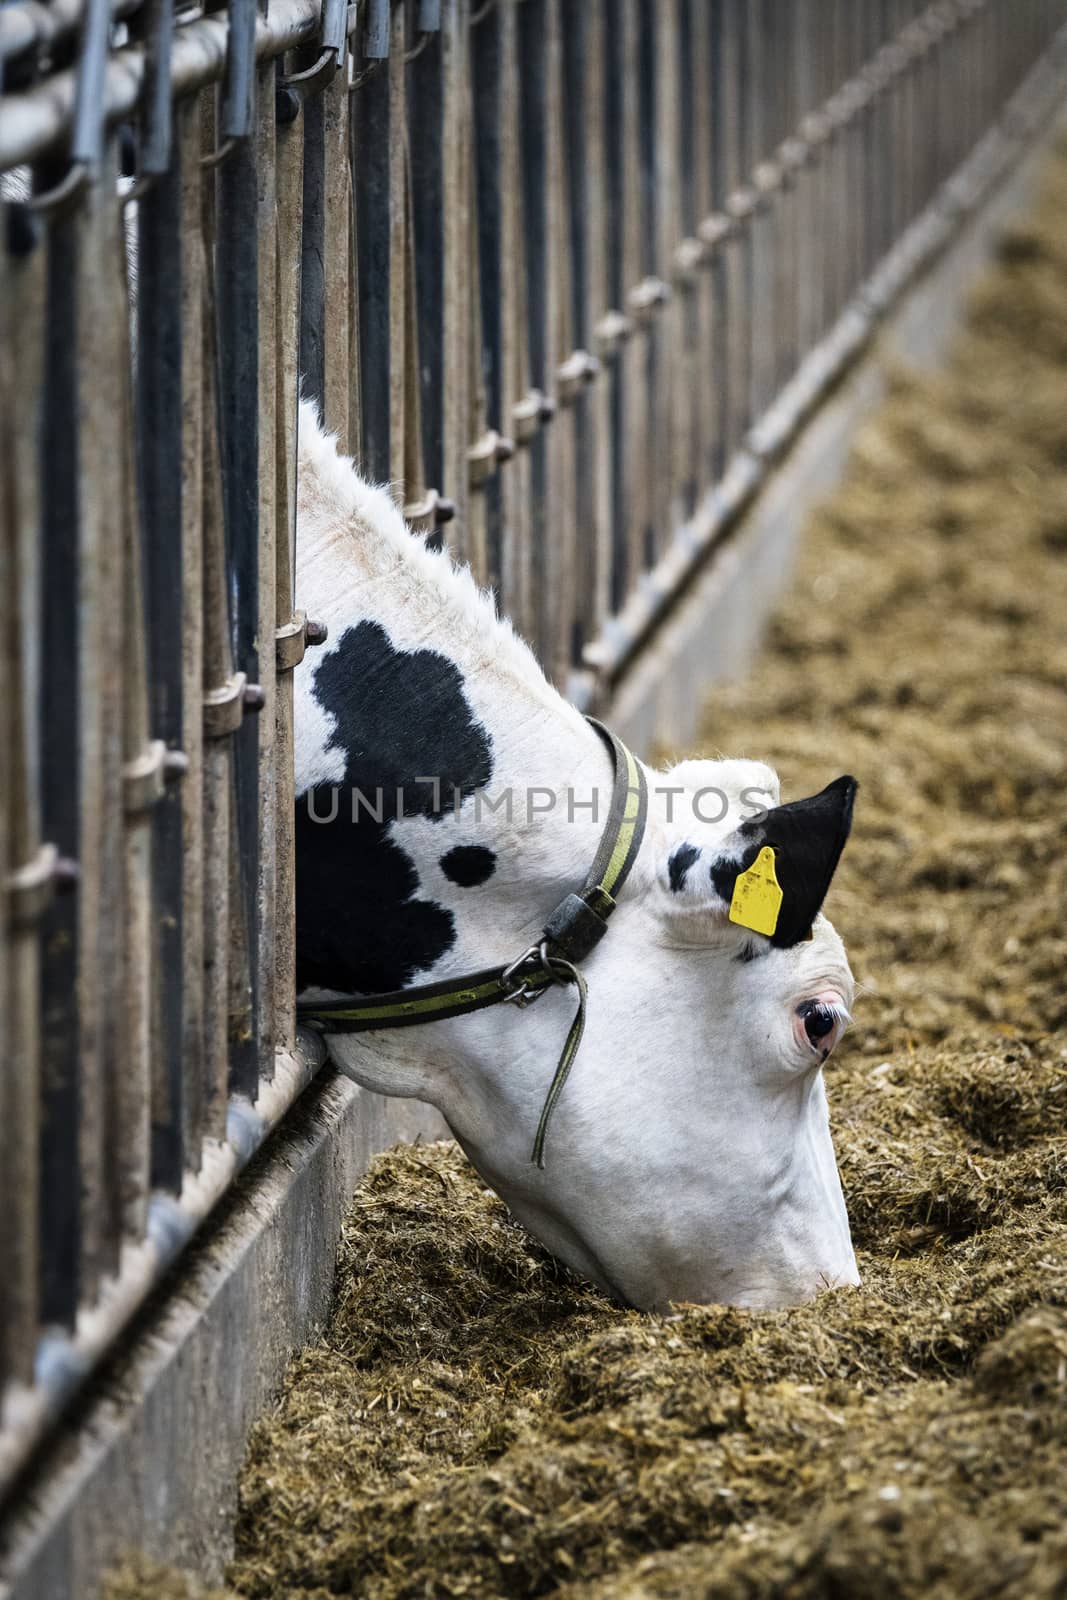 Cow in a stable eating food from behind the bars by Sportactive